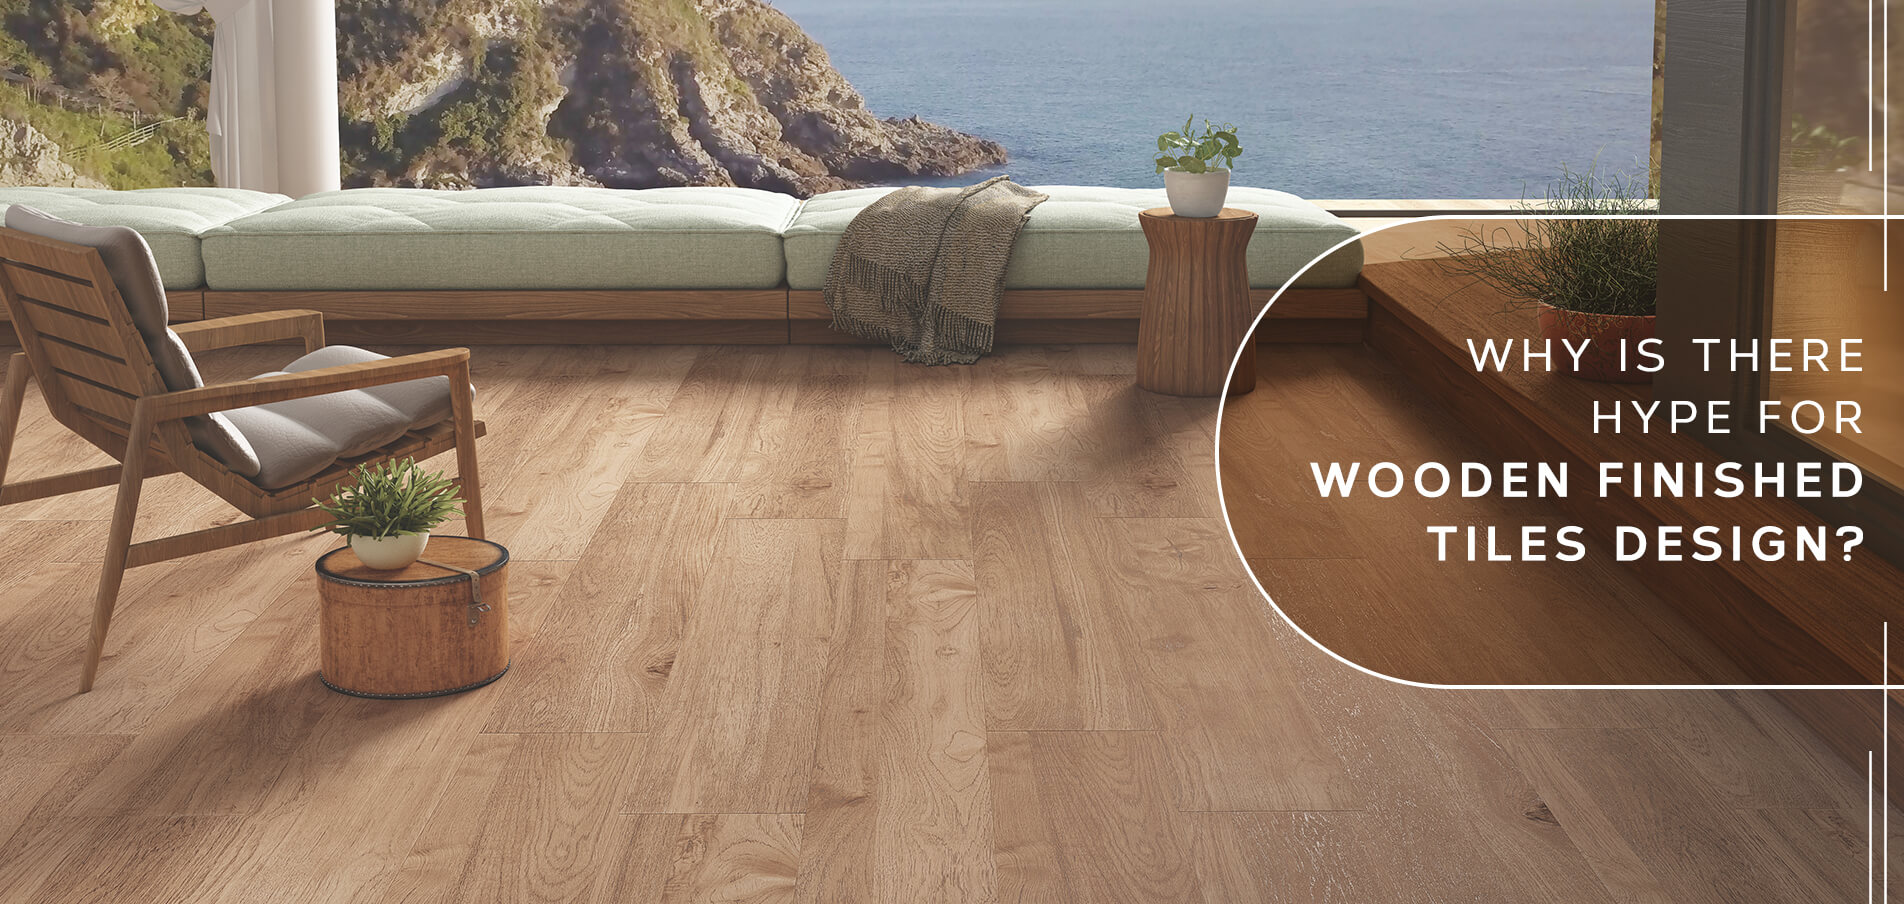 The Hype for Wooden Finished Tiles: A Blend of Style and Affordability